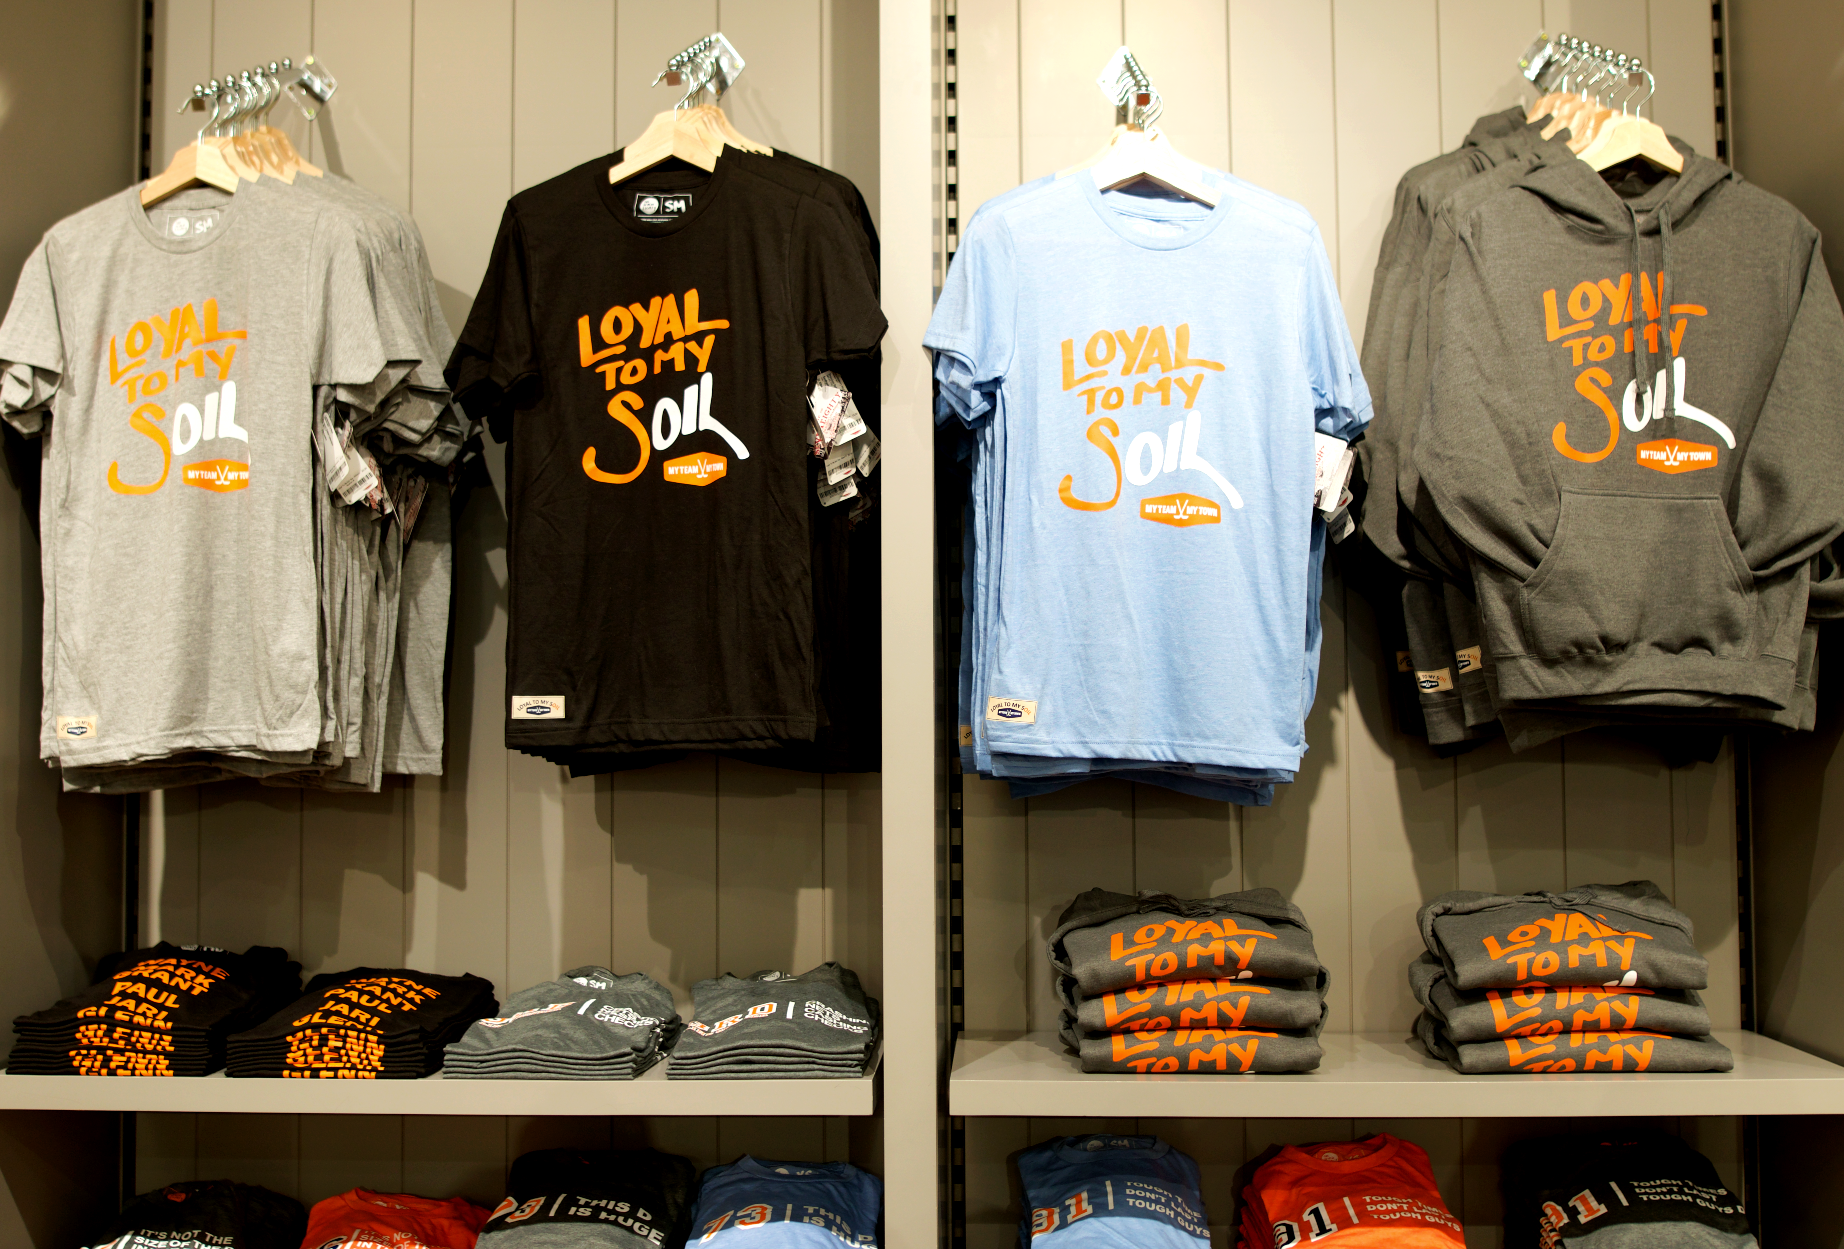 store display of t-shirts with "Loyal to my soil" graphic